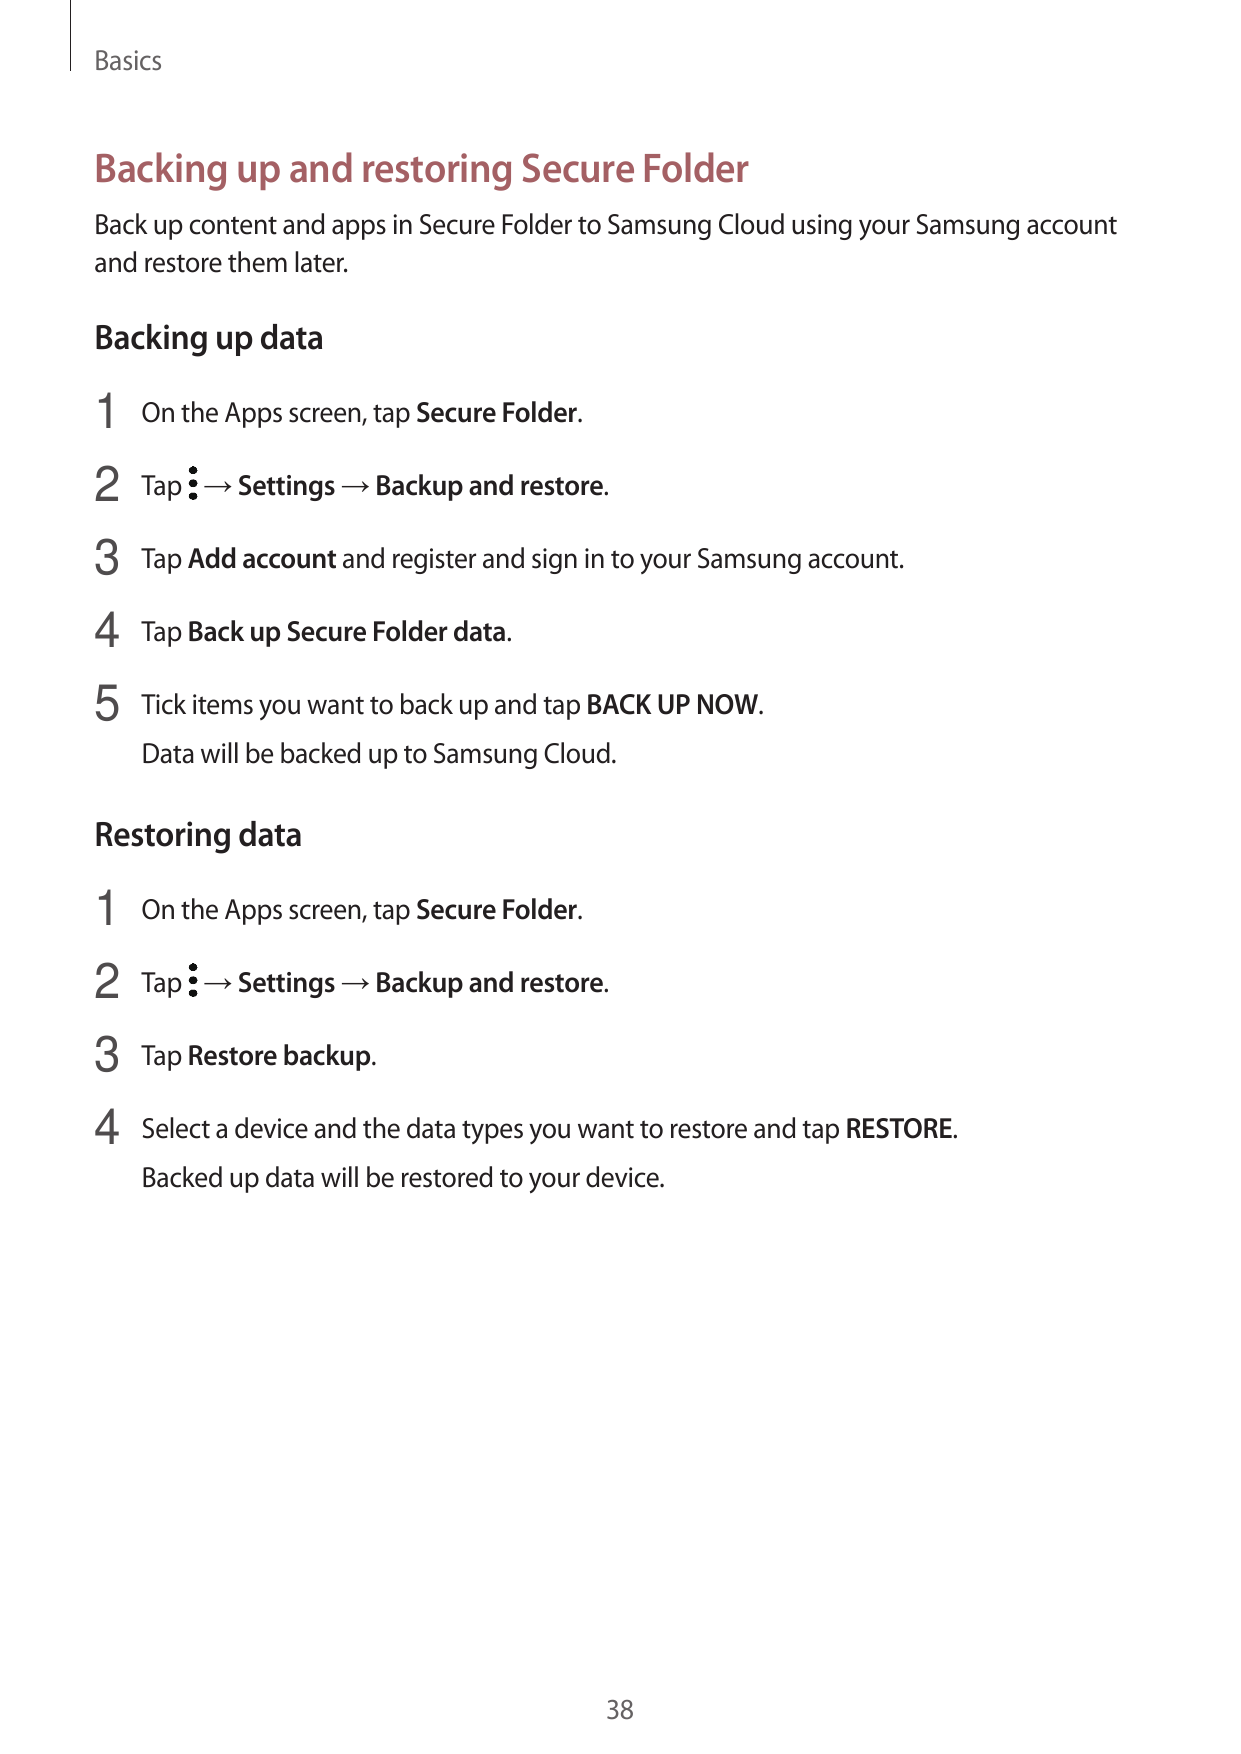 BasicsBacking up and restoring Secure FolderBack up content and apps in Secure Folder to Samsung Cloud using your Samsung accoun